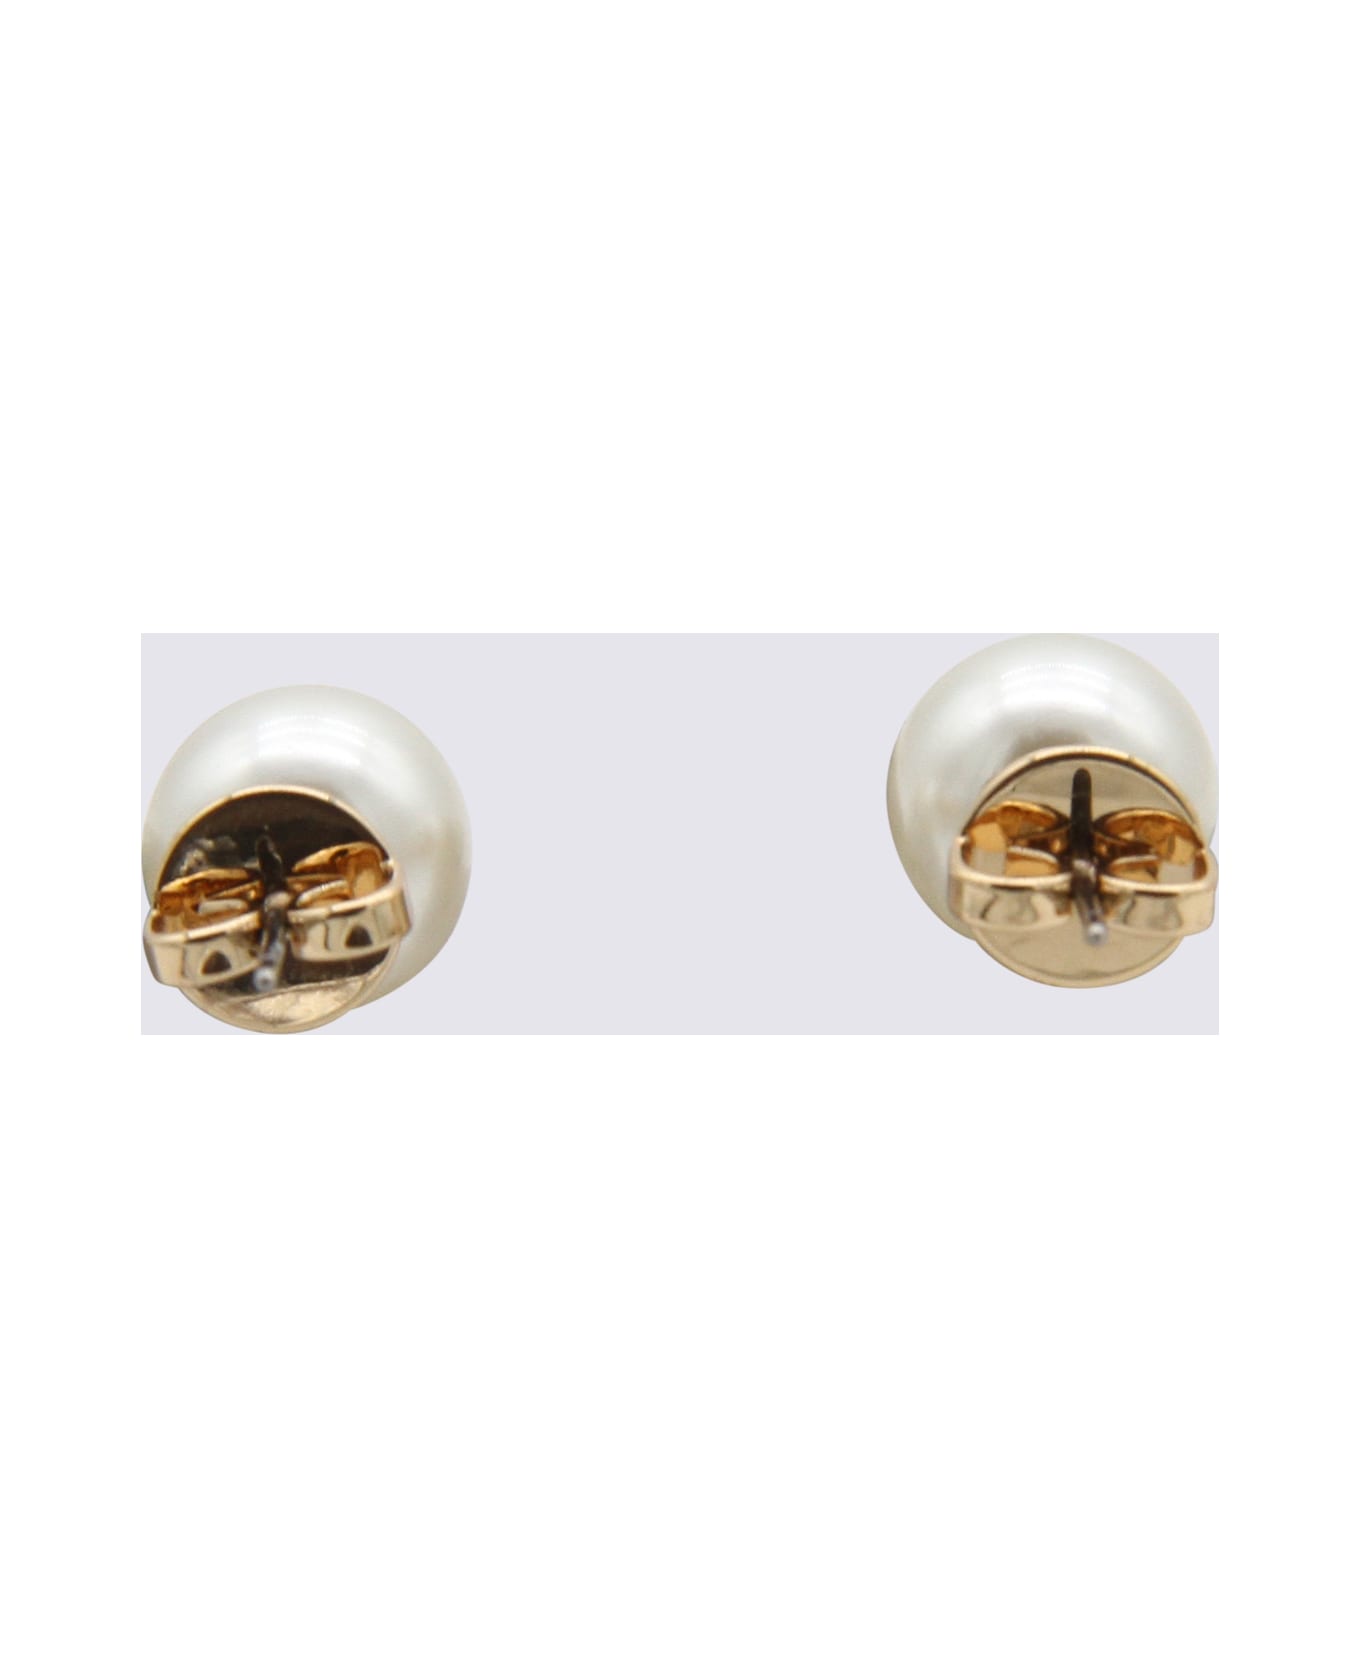 Tory Burch Gold Tone Brass Earrings - Ivory / Tory Gold イヤリング